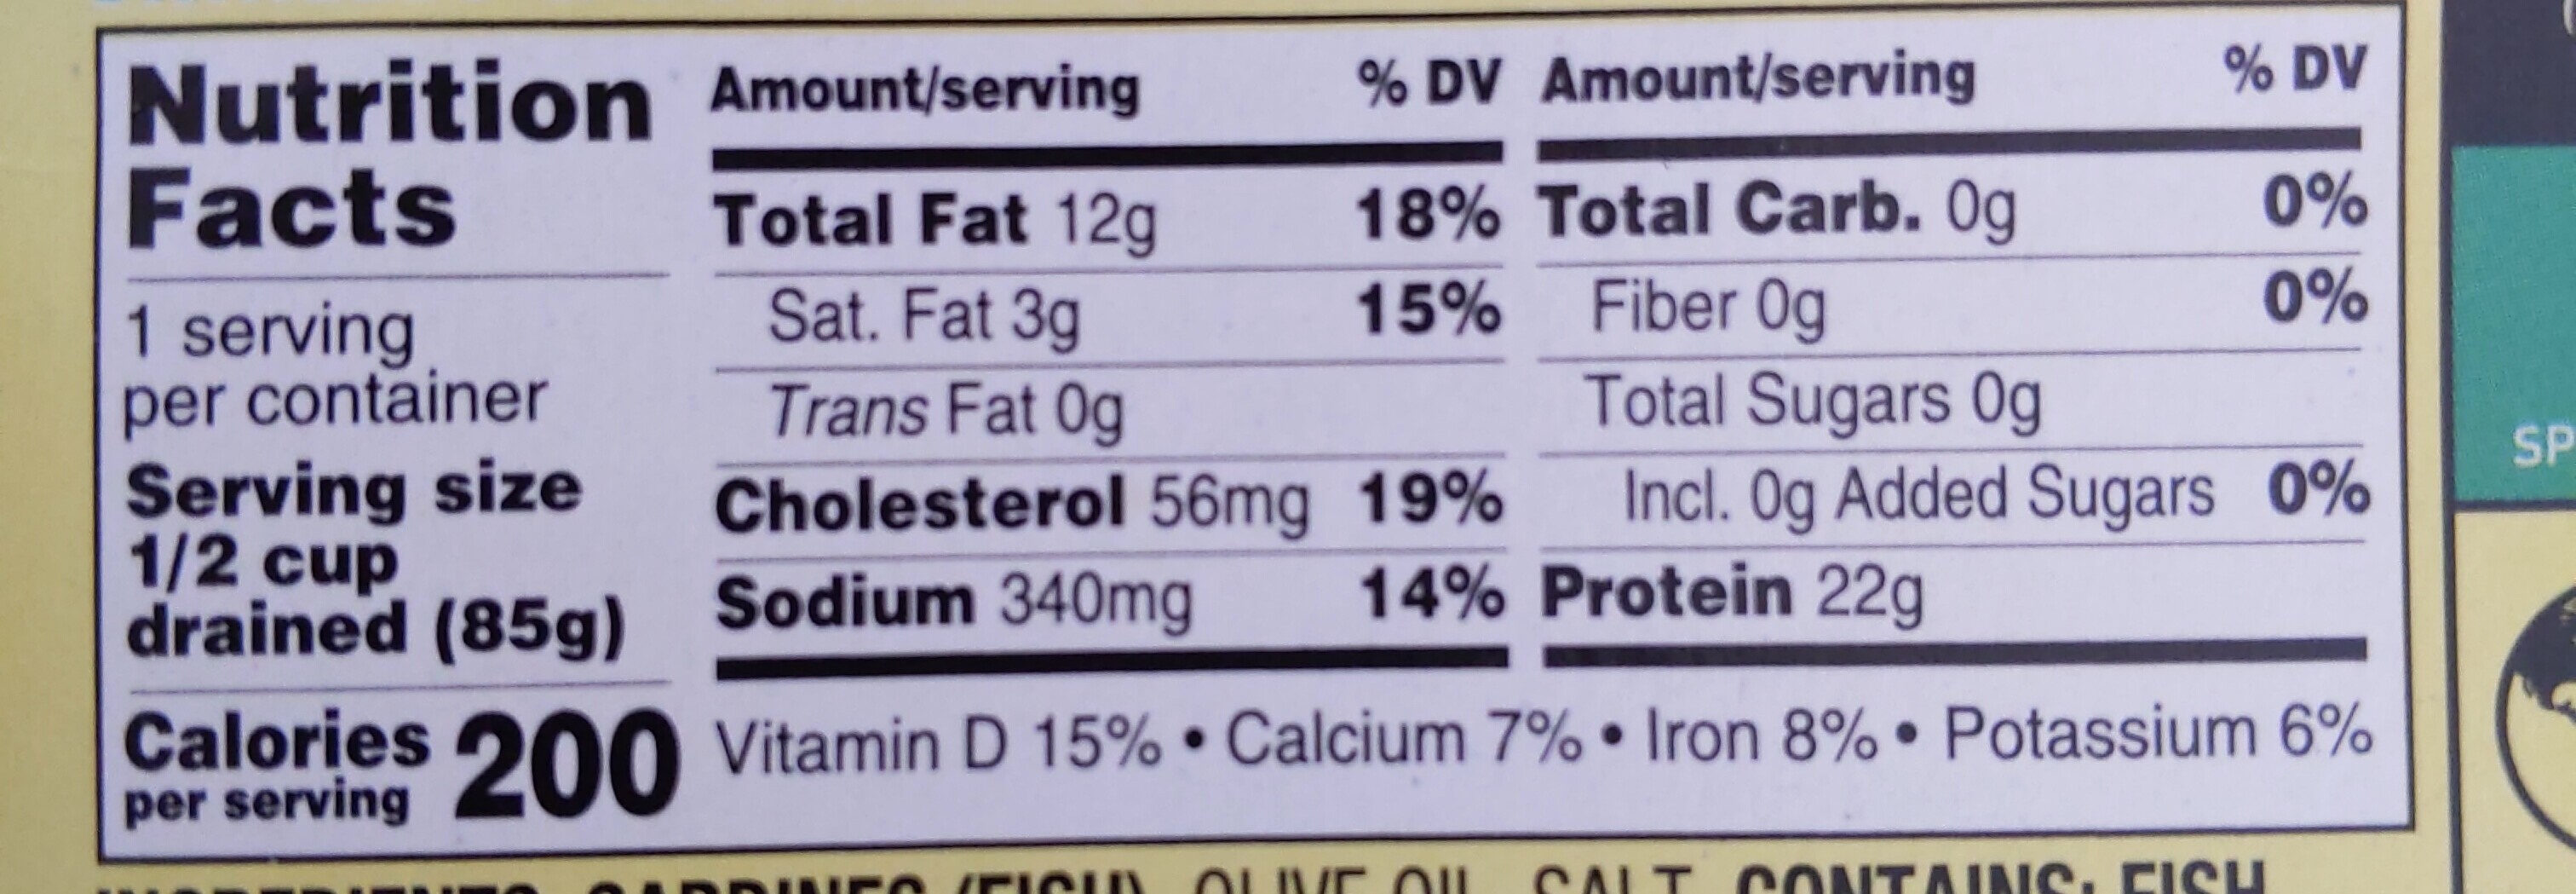 Sardines in olive oil - Nutrition facts